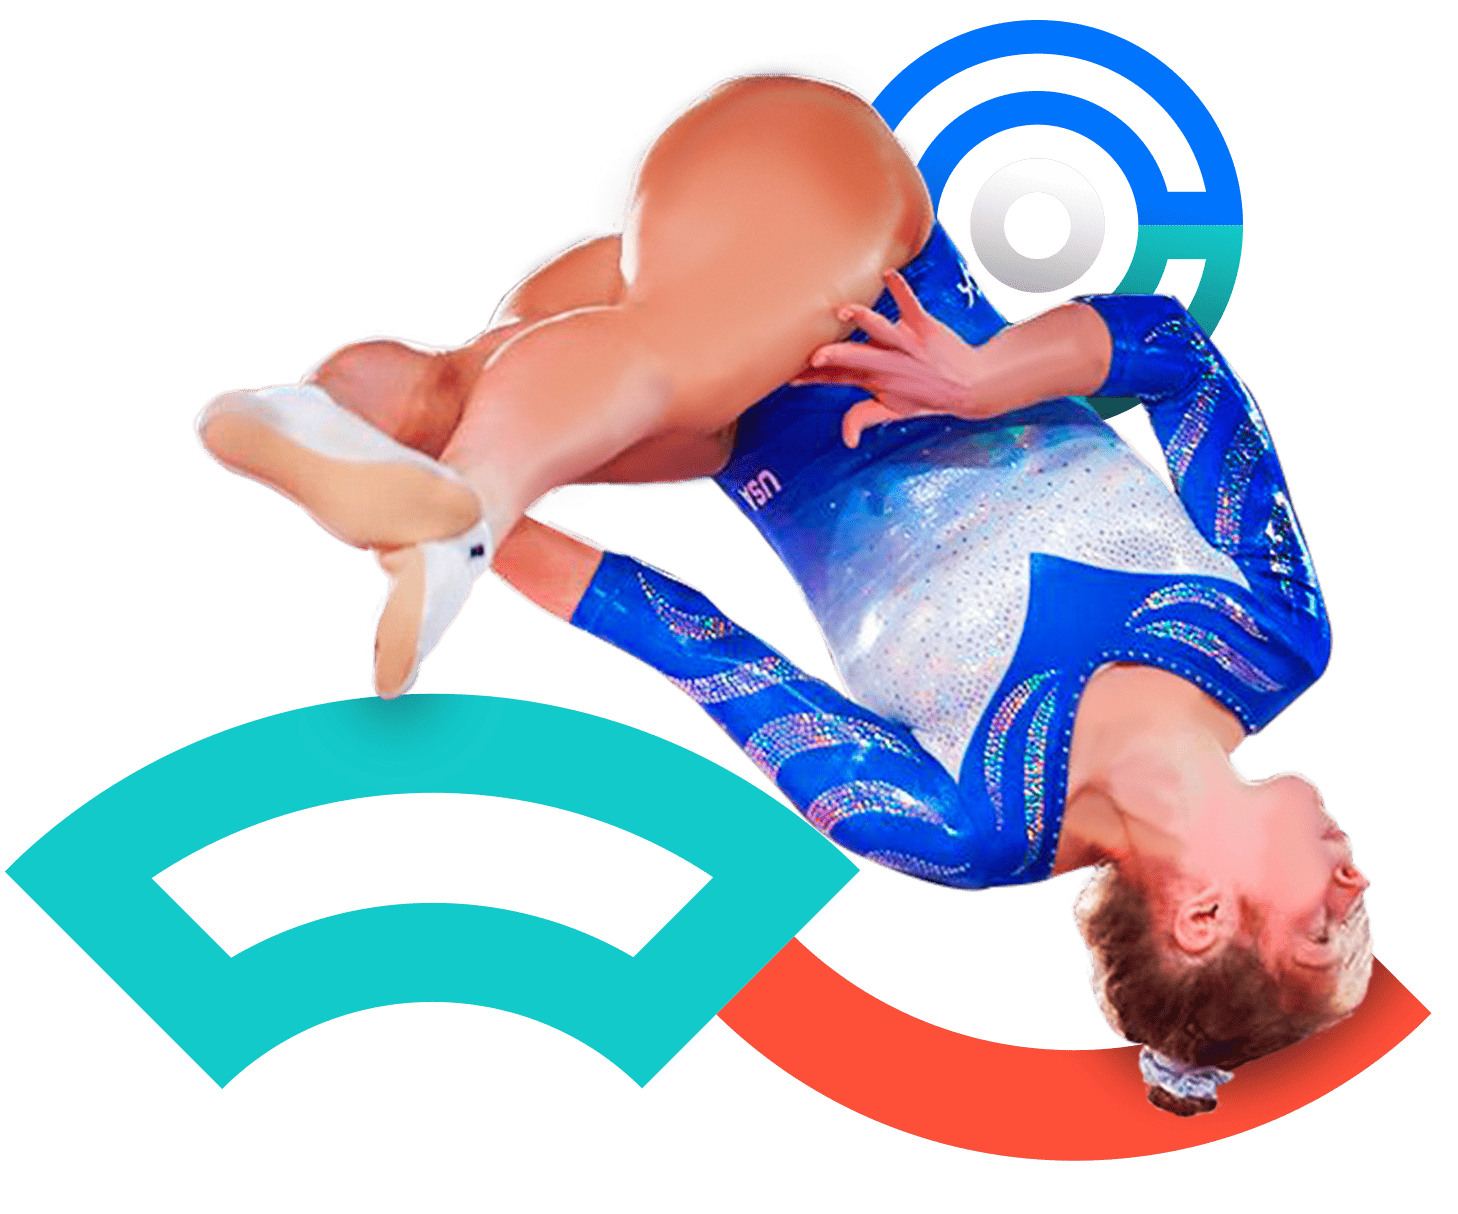 In the picture, a female gymnast executes her jumping routine twisting her body. She is wearing a blue uniform.